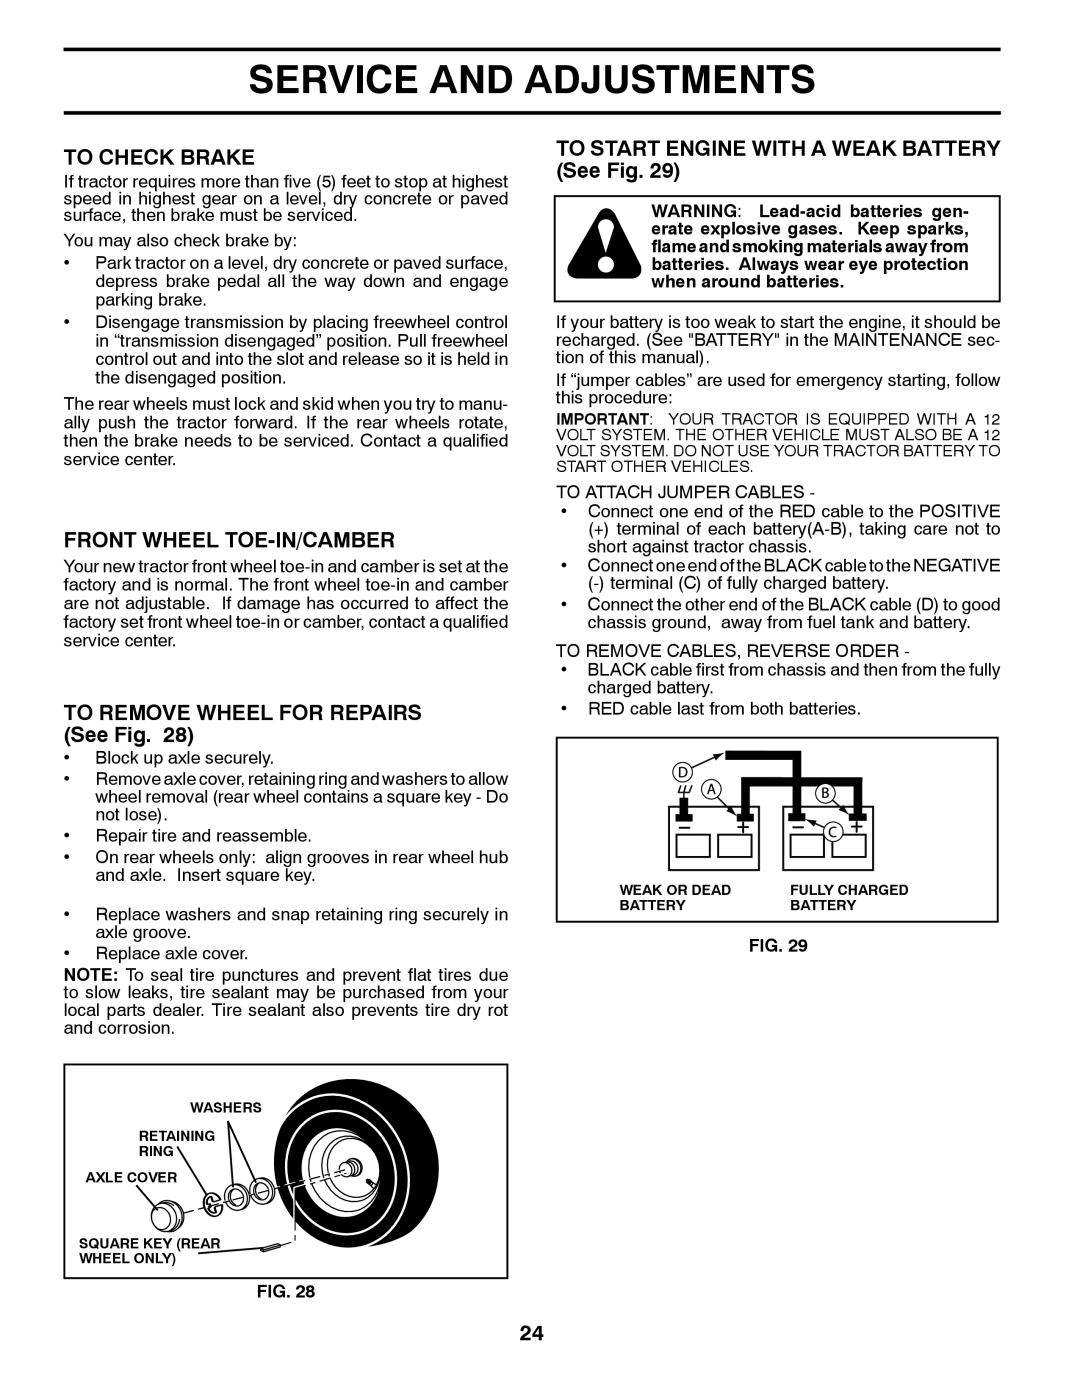 Univex 96043004400 To Check Brake, Front Wheel Toe-In/Camber, TO REMOVE WHEEL FOR REPAIRS See Fig, Service And Adjustments 